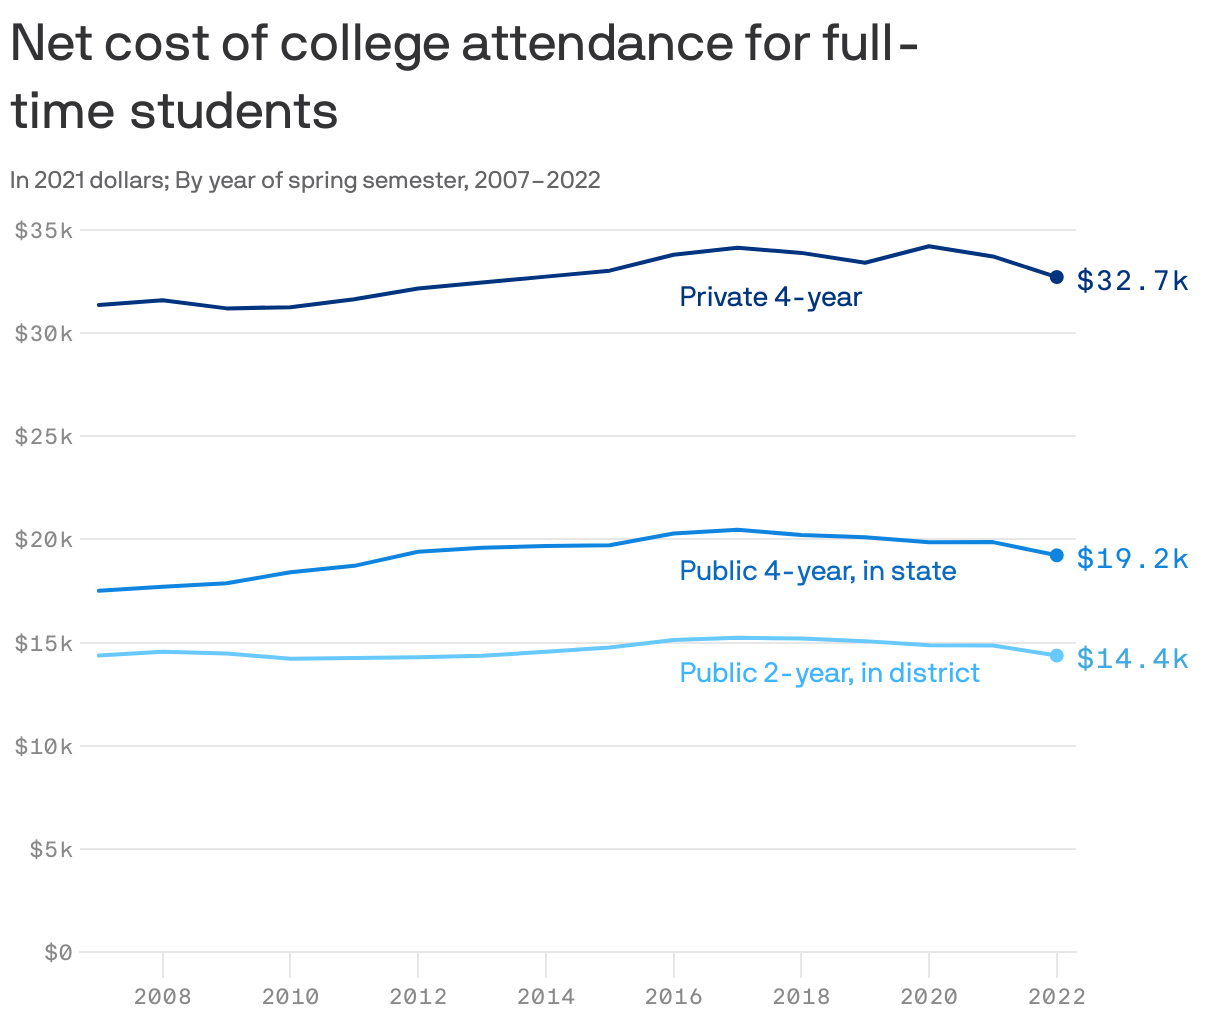 Net cost of college attendance for full-time&nbspstudents